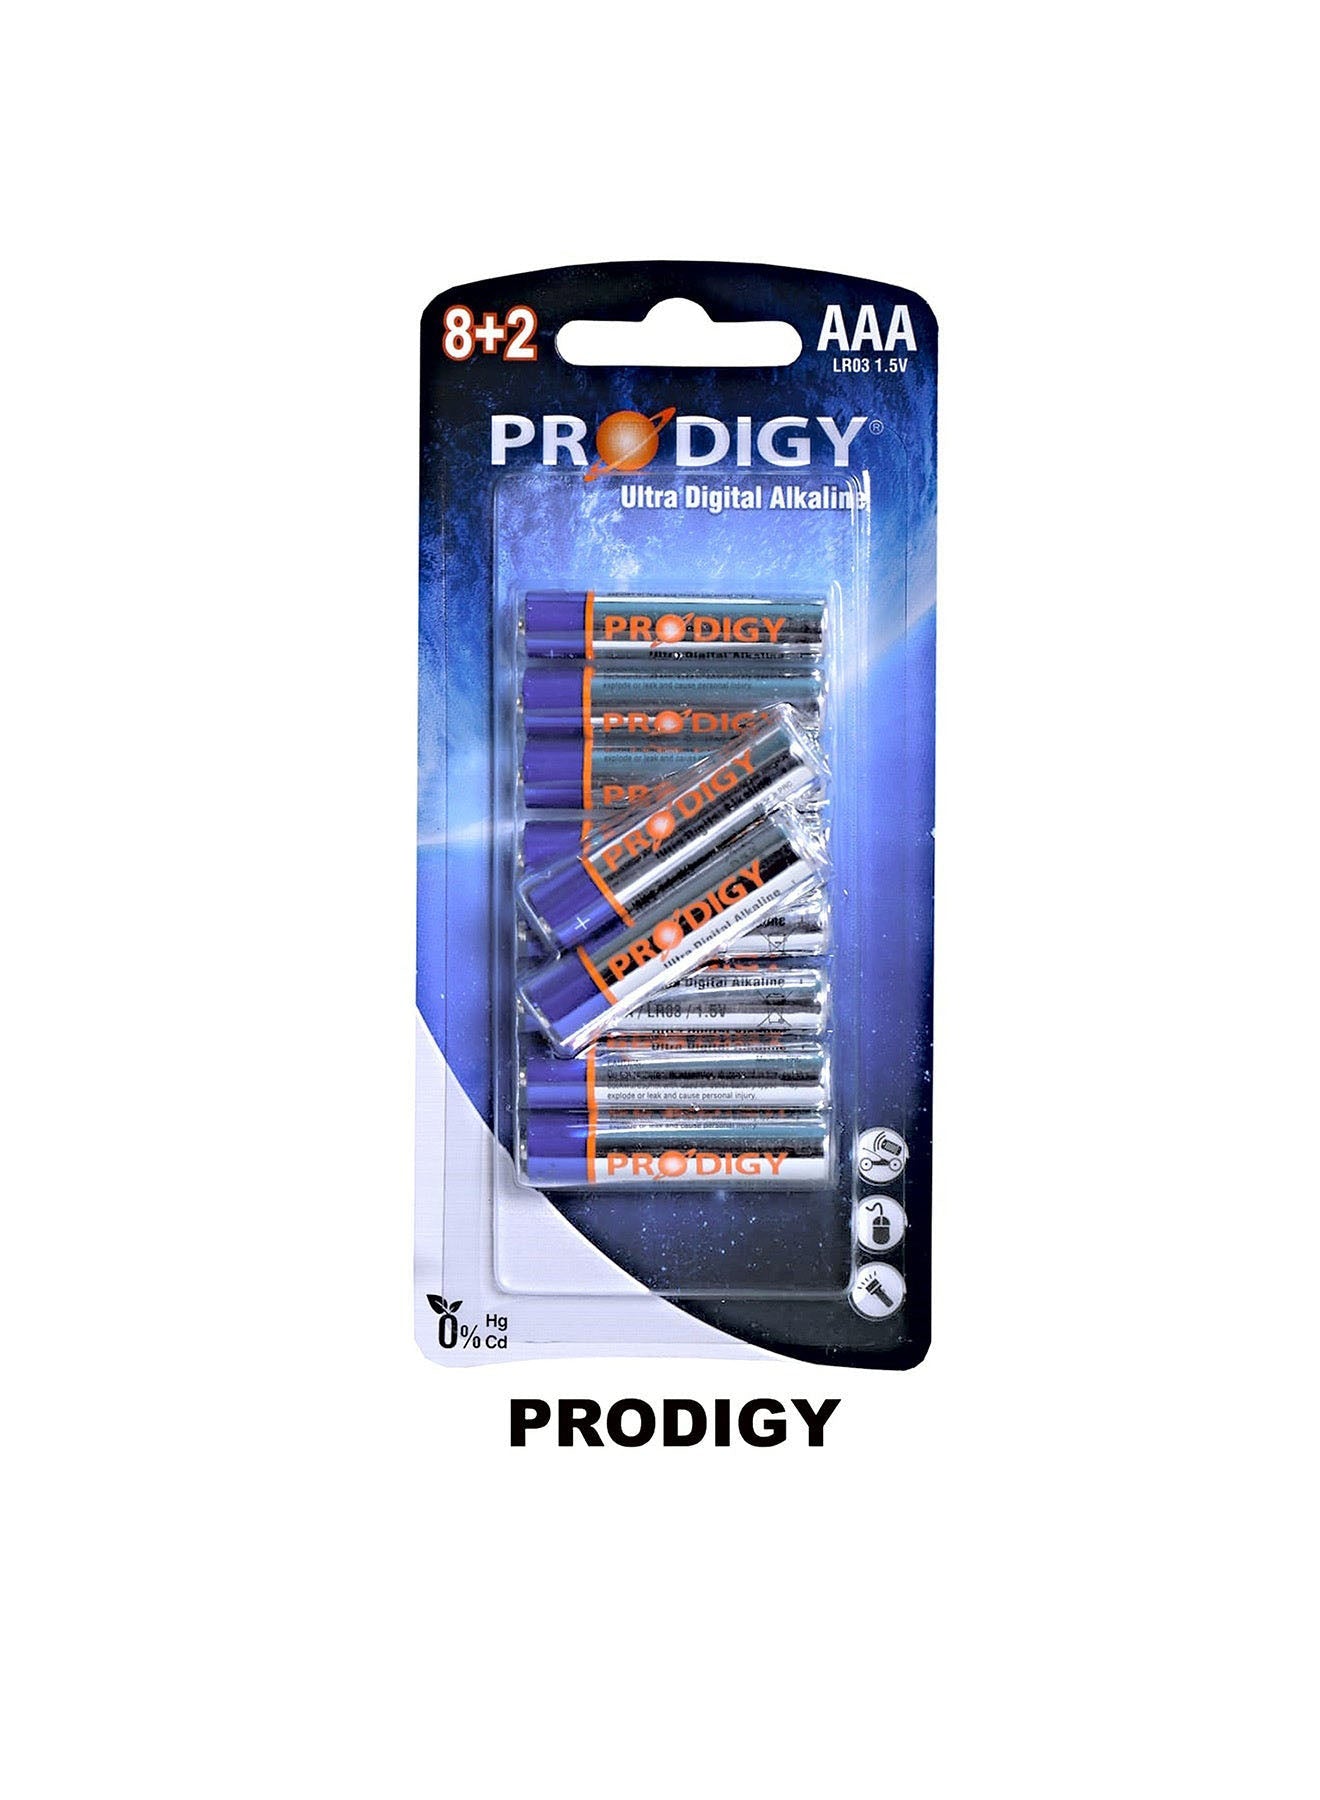 Prodigy Alkaline LR03UD 82B AAA10 Value Pack of 4 